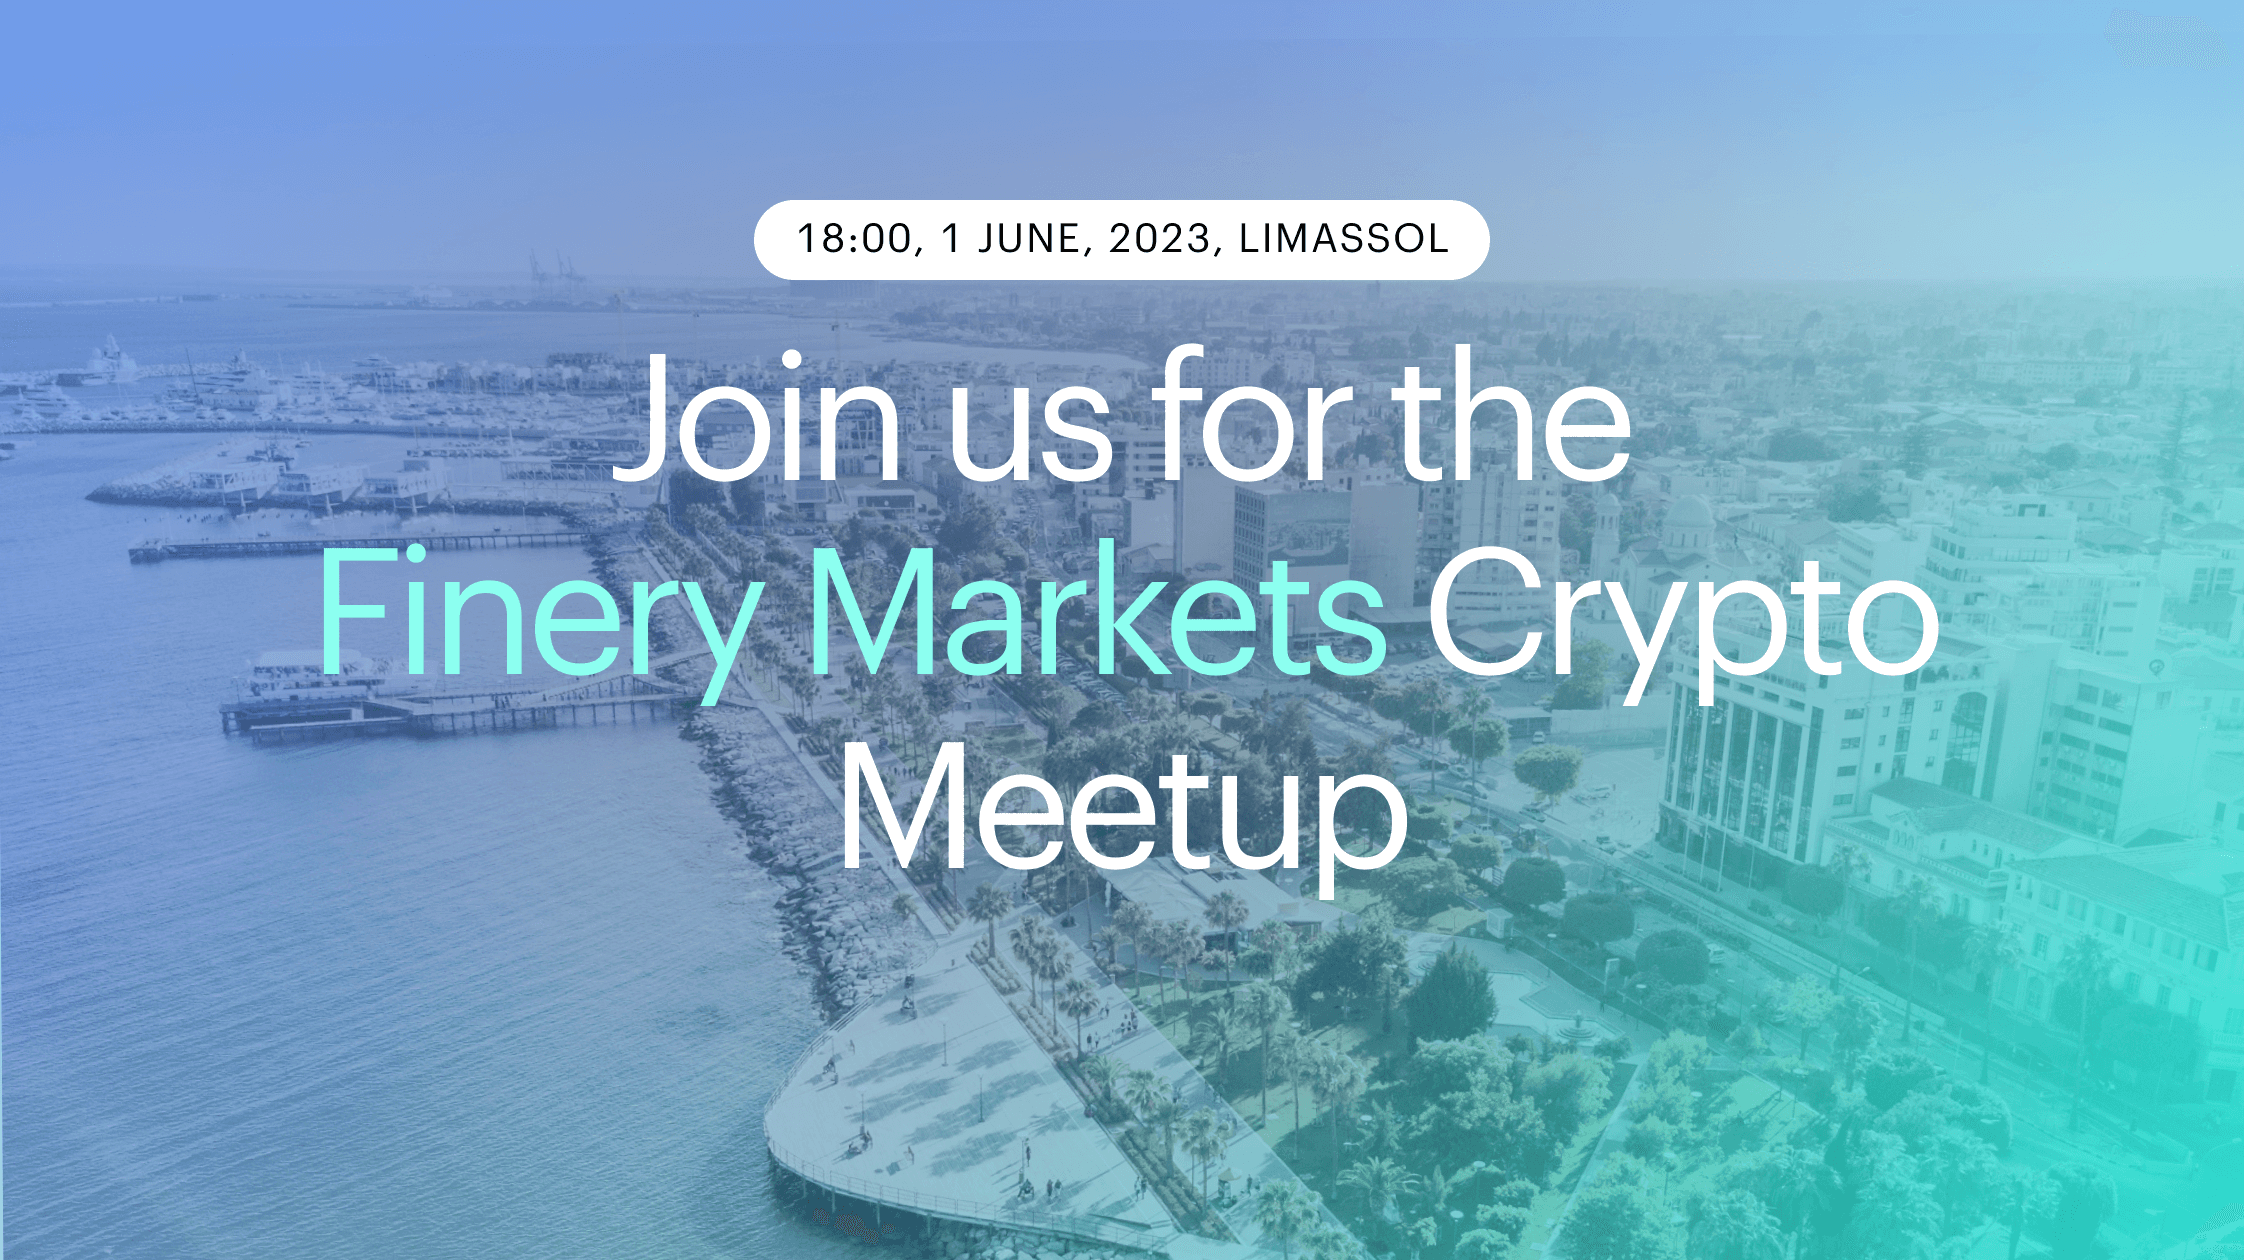 Finery Markets is hosting a B2B crypto meetup and networking on June 1st, 2023